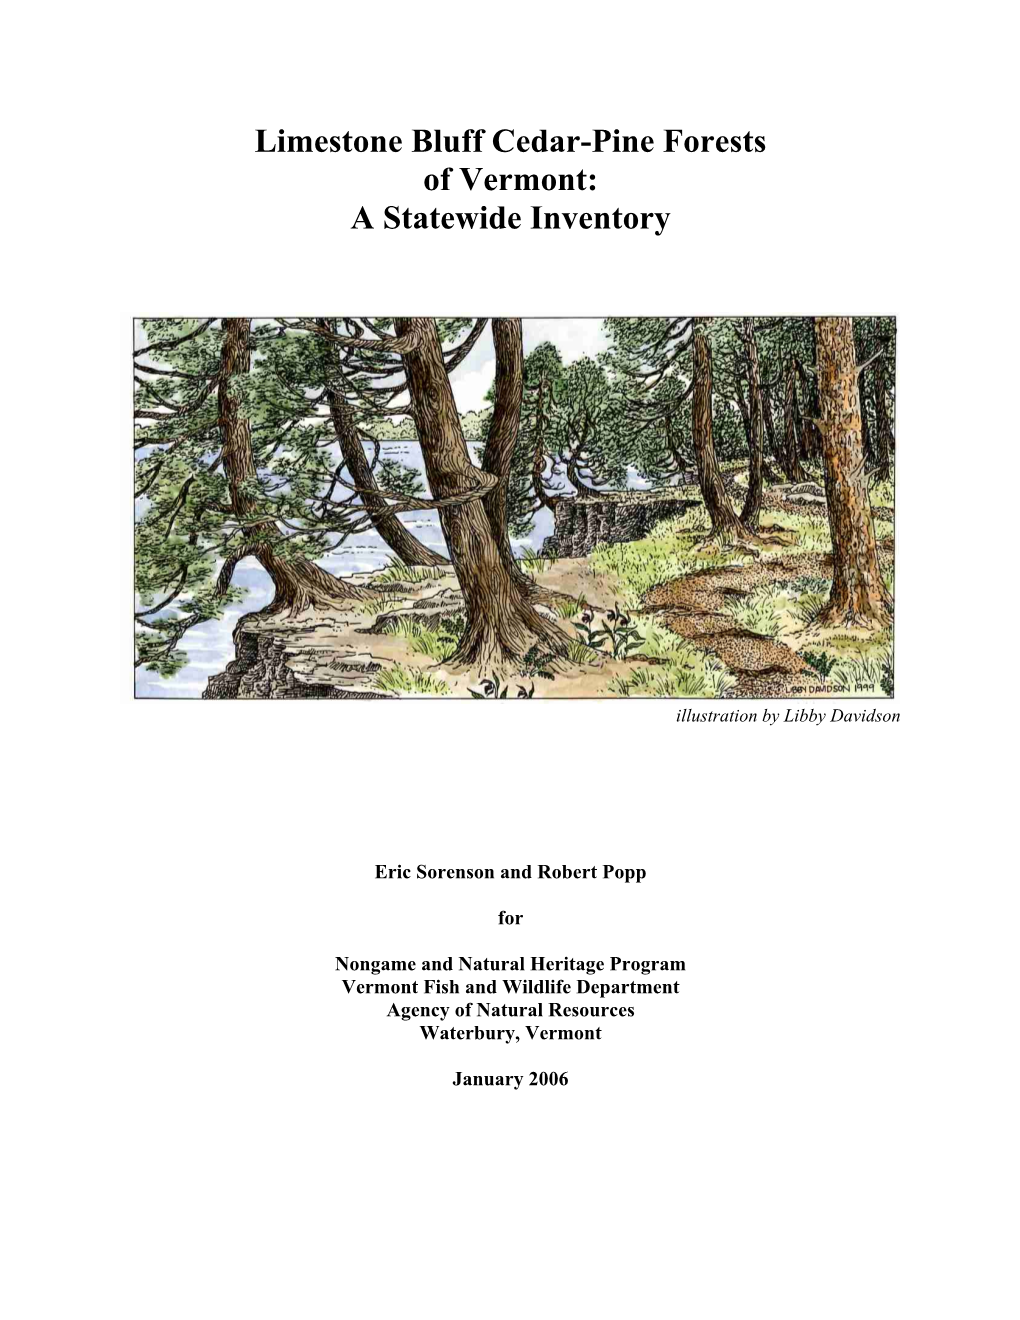 Limestone Bluff Cedar-Pine Forests of Vermont: a Statewide Inventory